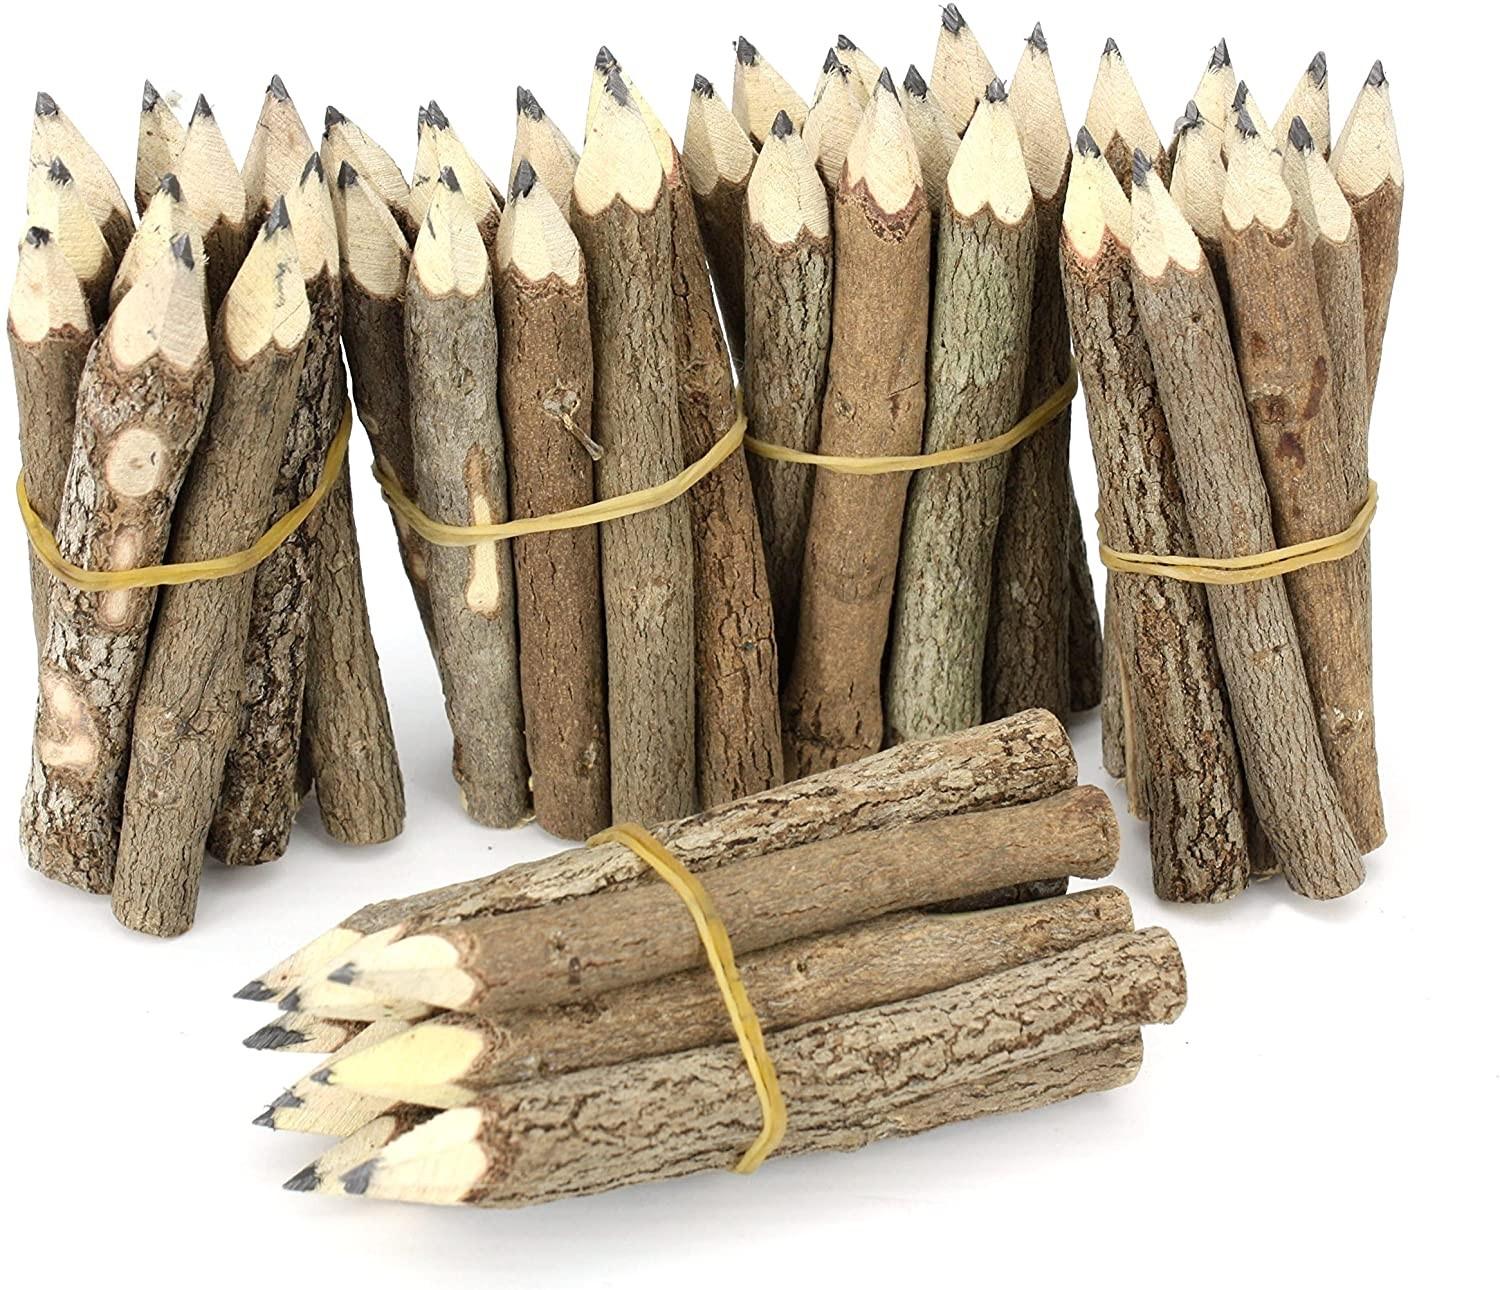 Assorted-Stick Twig Natural Graphite Outdoor Wooden Pencils Tree Child Camping Decorative Color